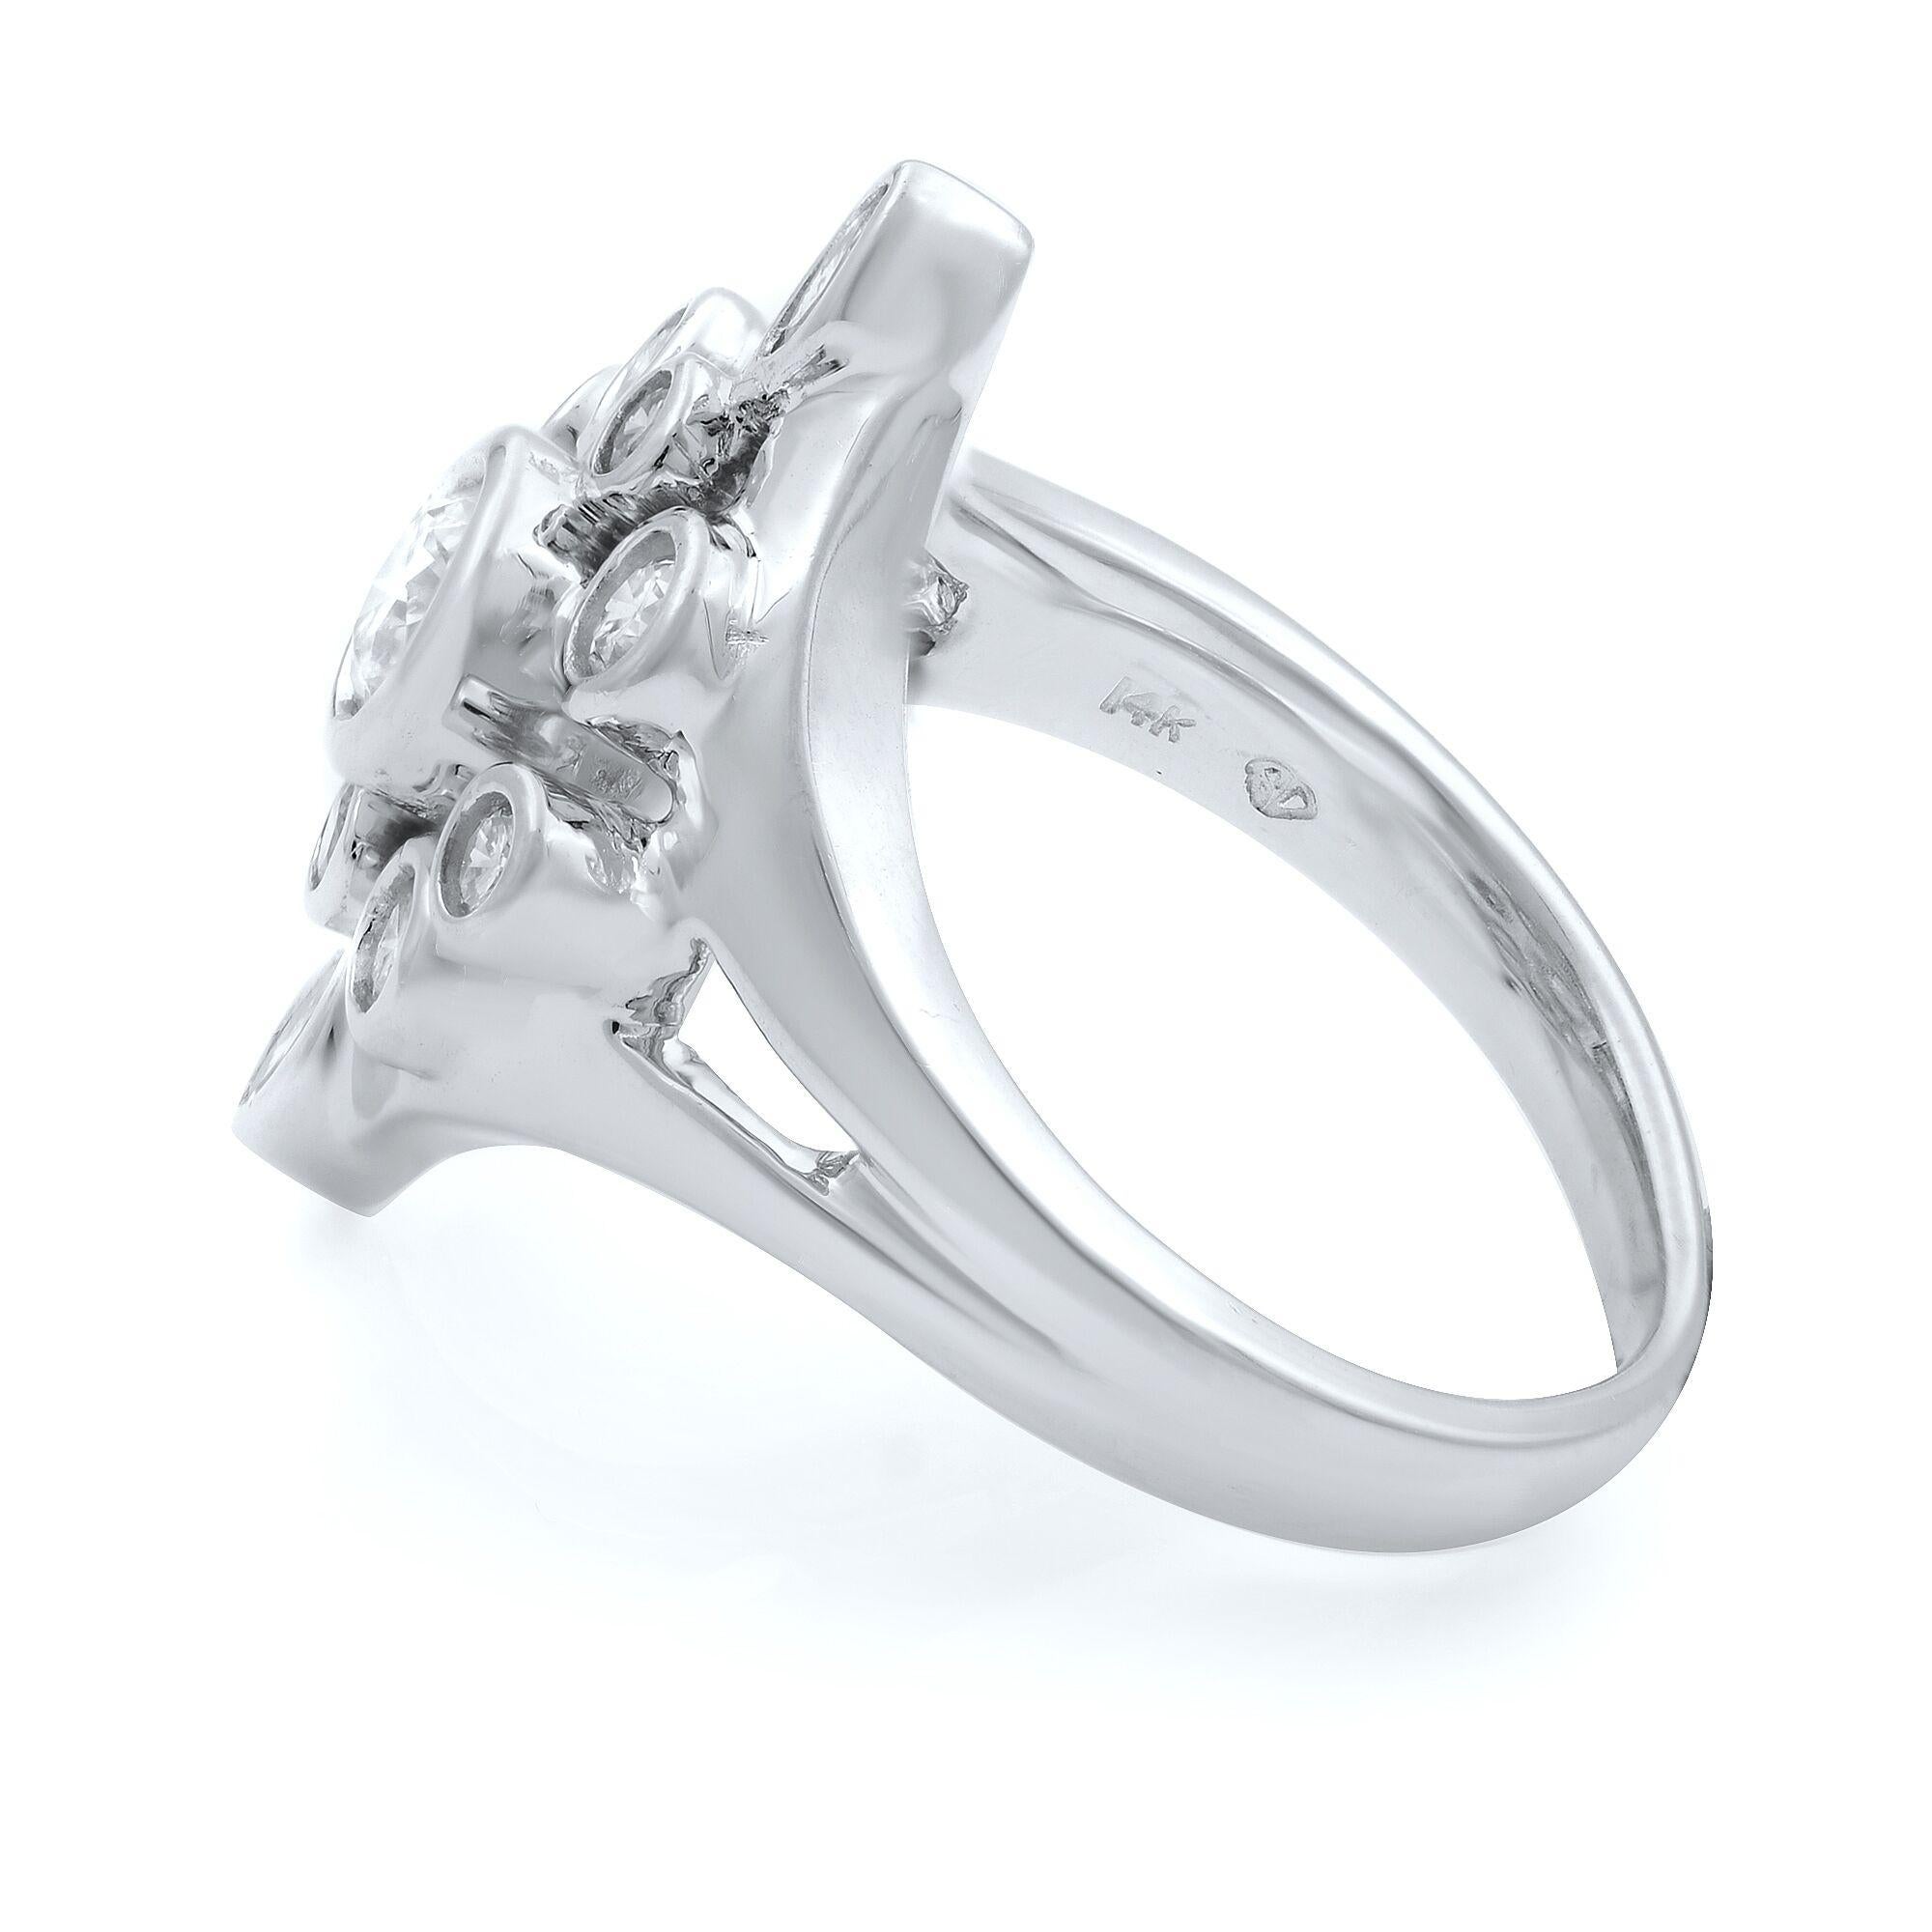 This stunning ladies diamond cocktail ring is bezel set with 11 diamonds. Beautifully round cut diamonds are placed all over the frame which gives it an outstanding look. Metal: 14K White Gold. Stones: Natural Diamonds. Total Carat Weight: 1.00.